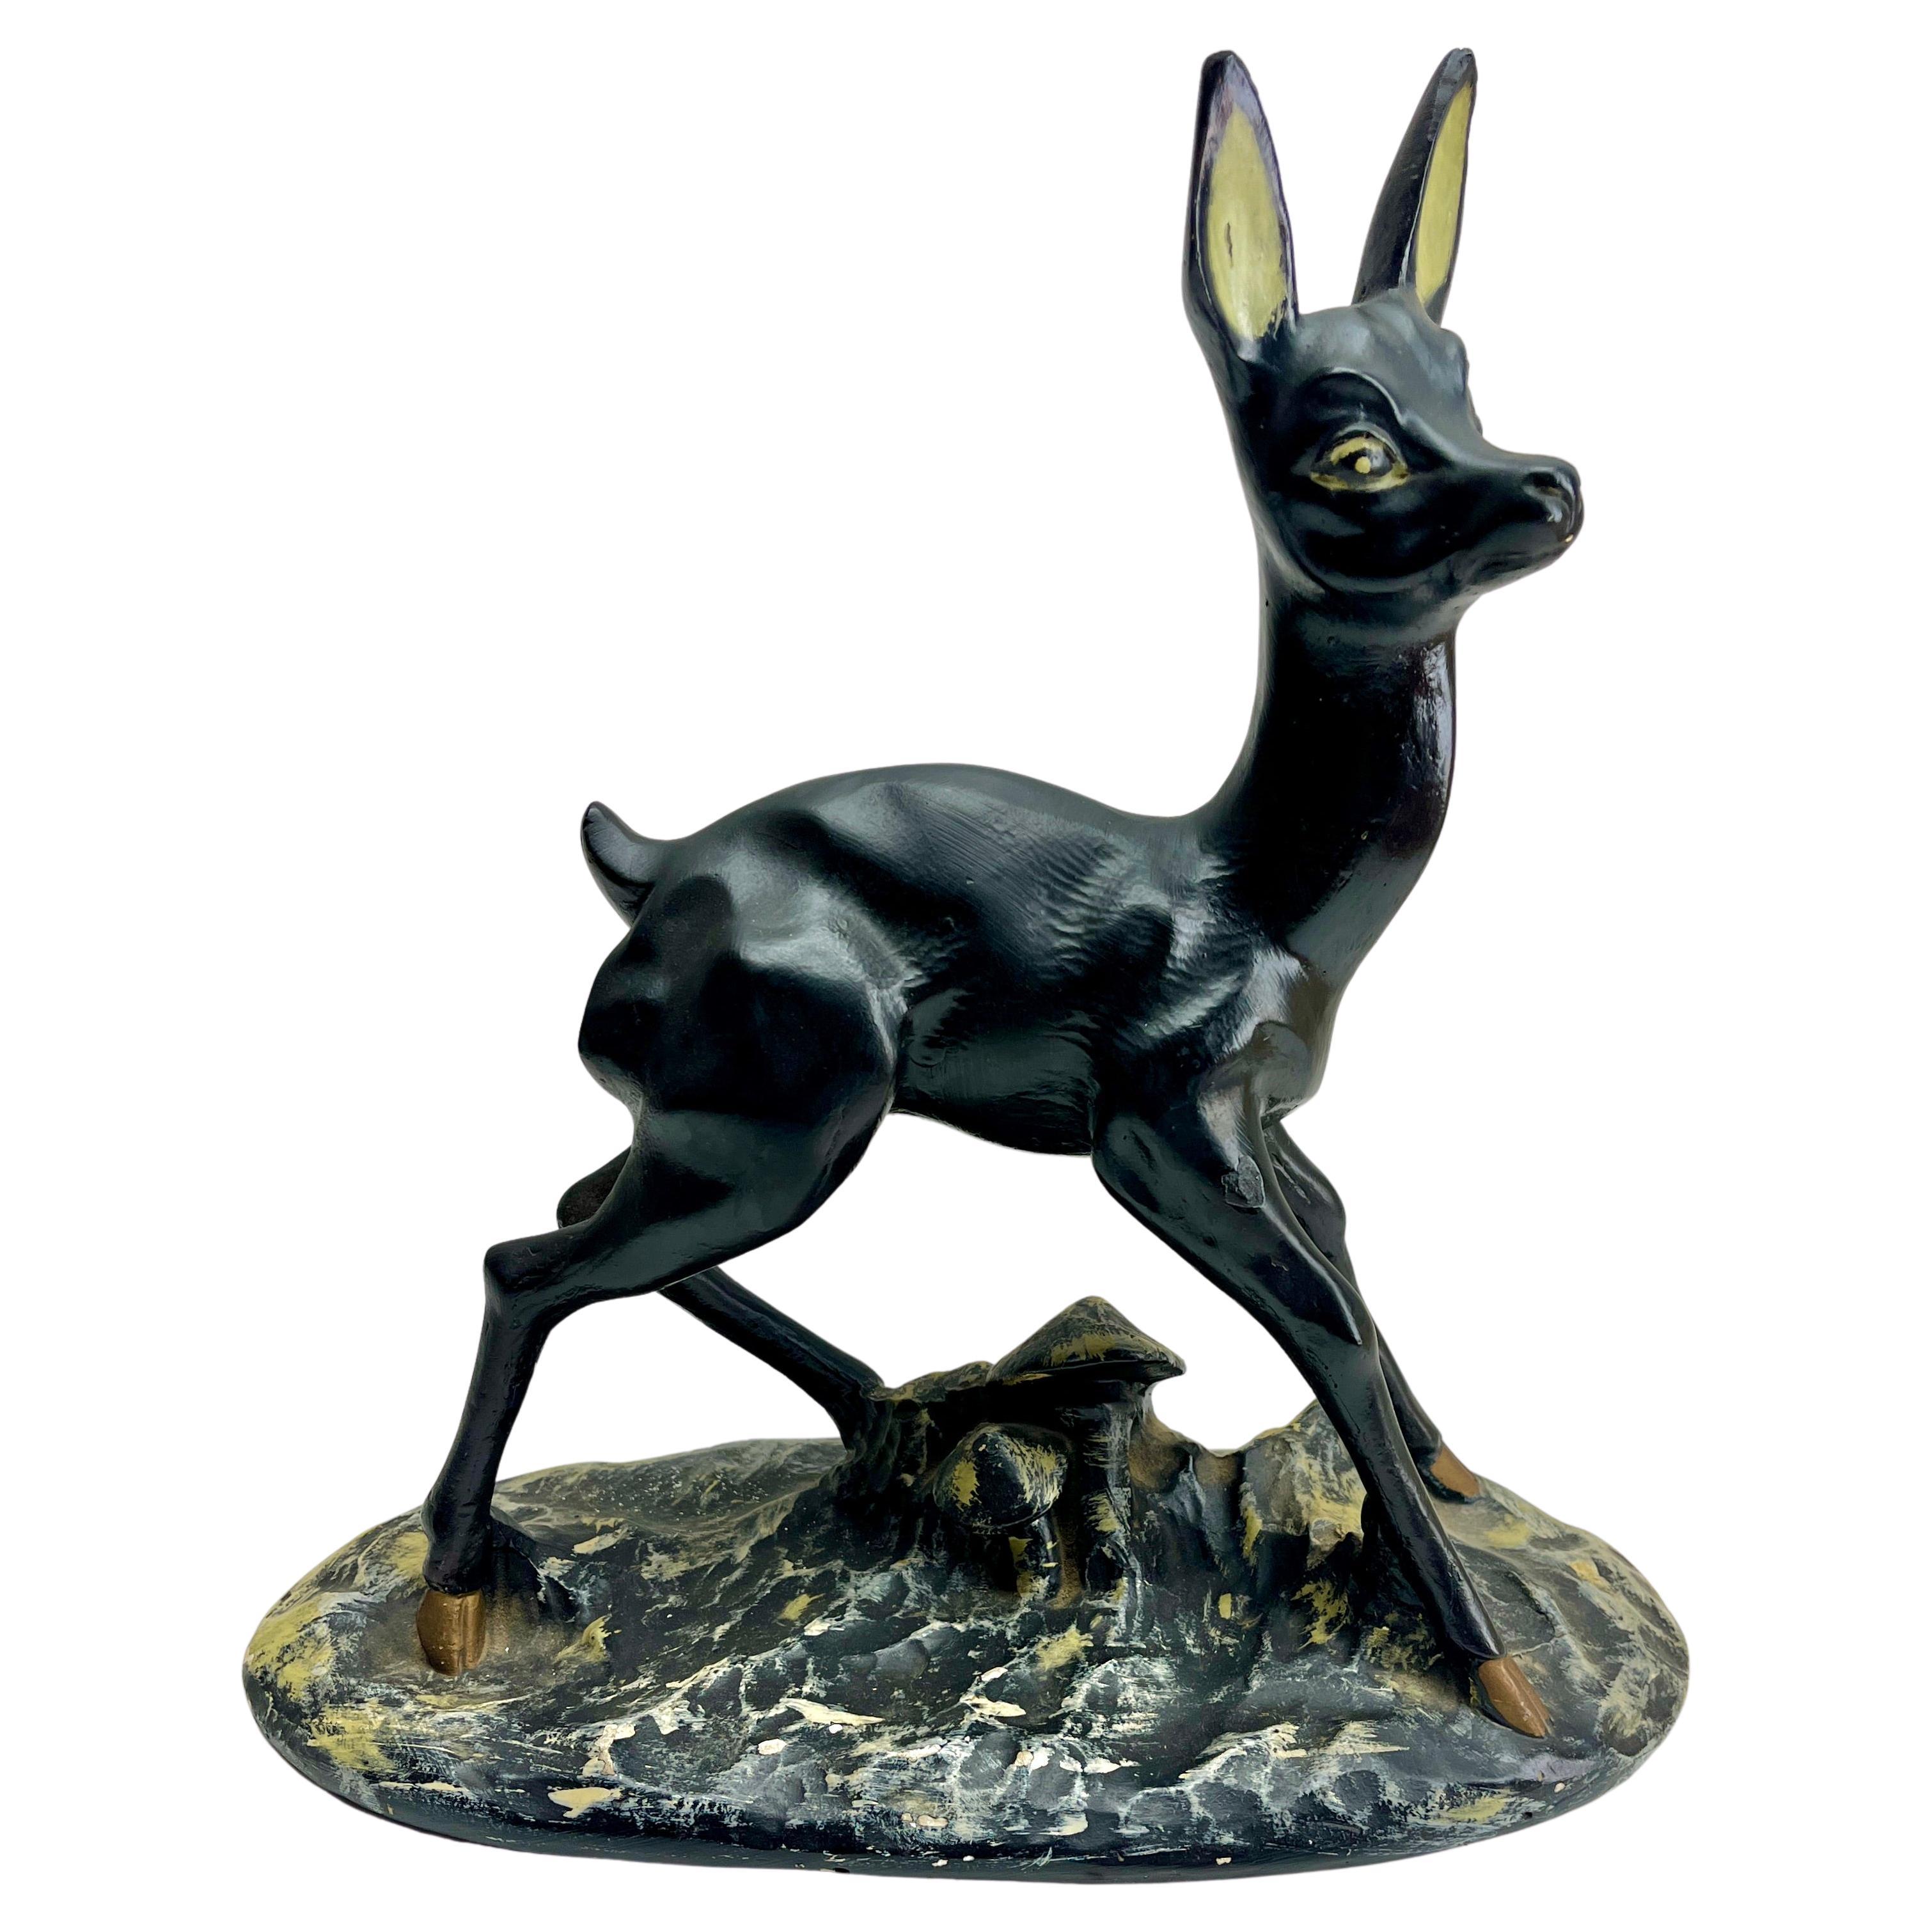 Stylish Plaster Handpainted Bambi Sculpture, Signed: Depose No 98 J.B For Sale